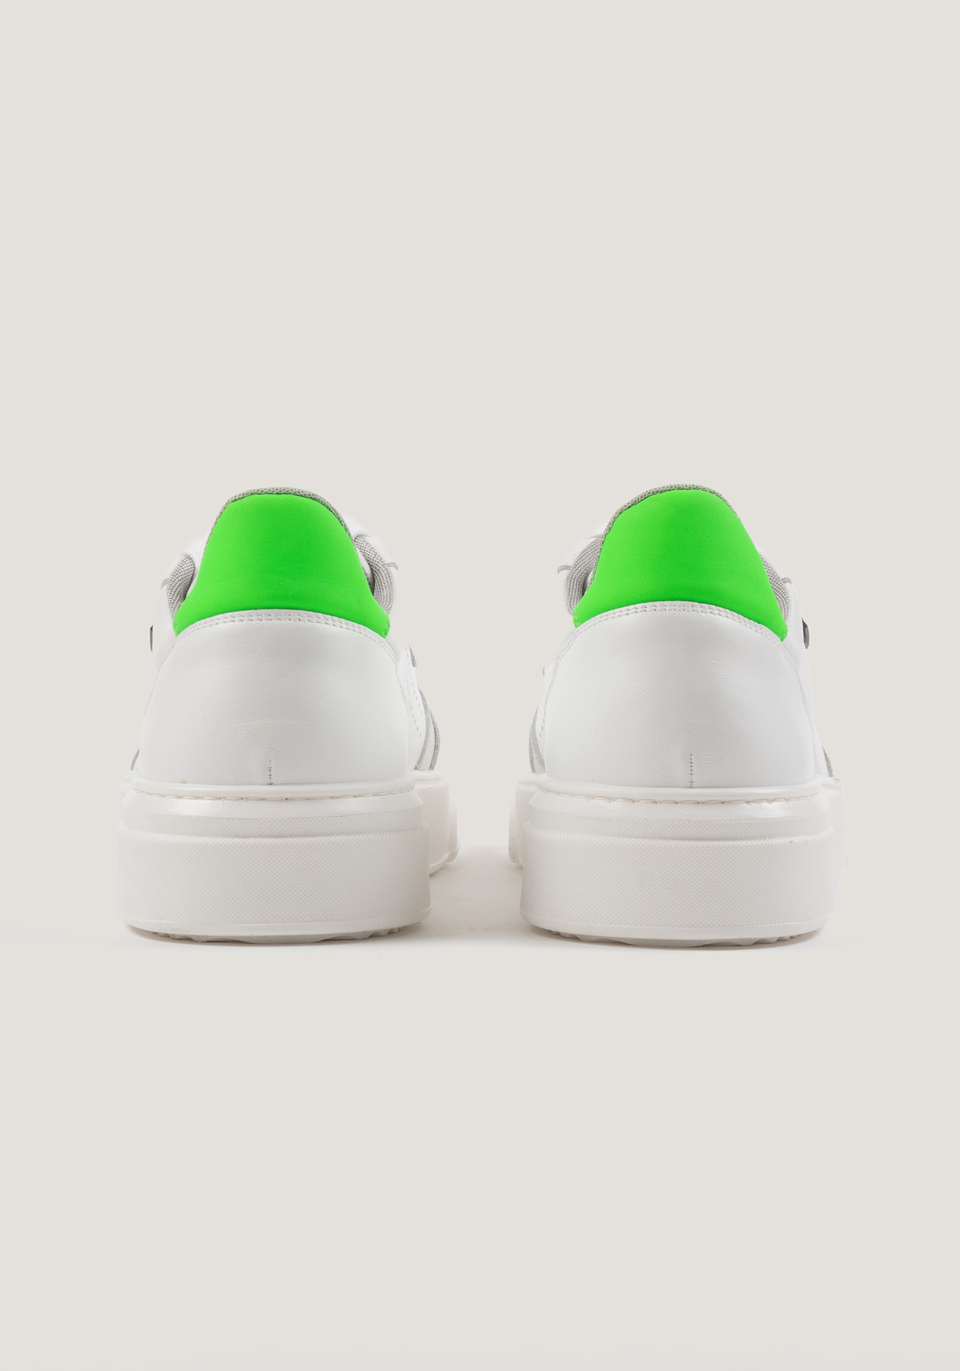 “RUSTLE” SNEAKER IN LEATHER WITH A NEON ACCENT - Antony Morato Online Shop